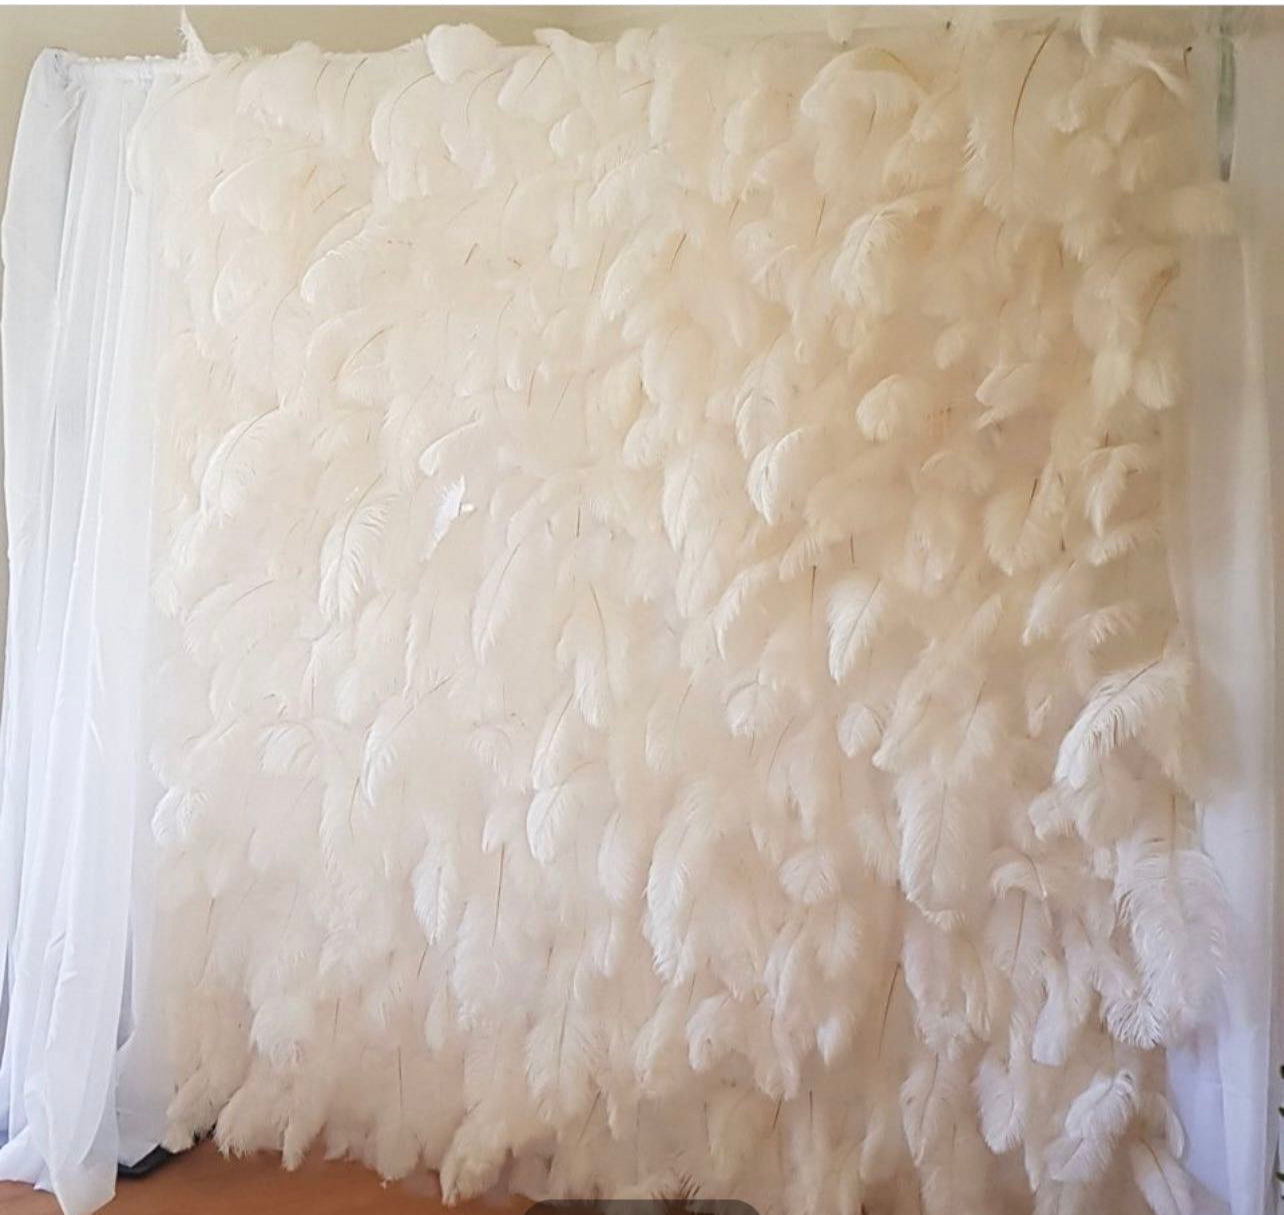 Feather Wall Party Hire | Melbourne